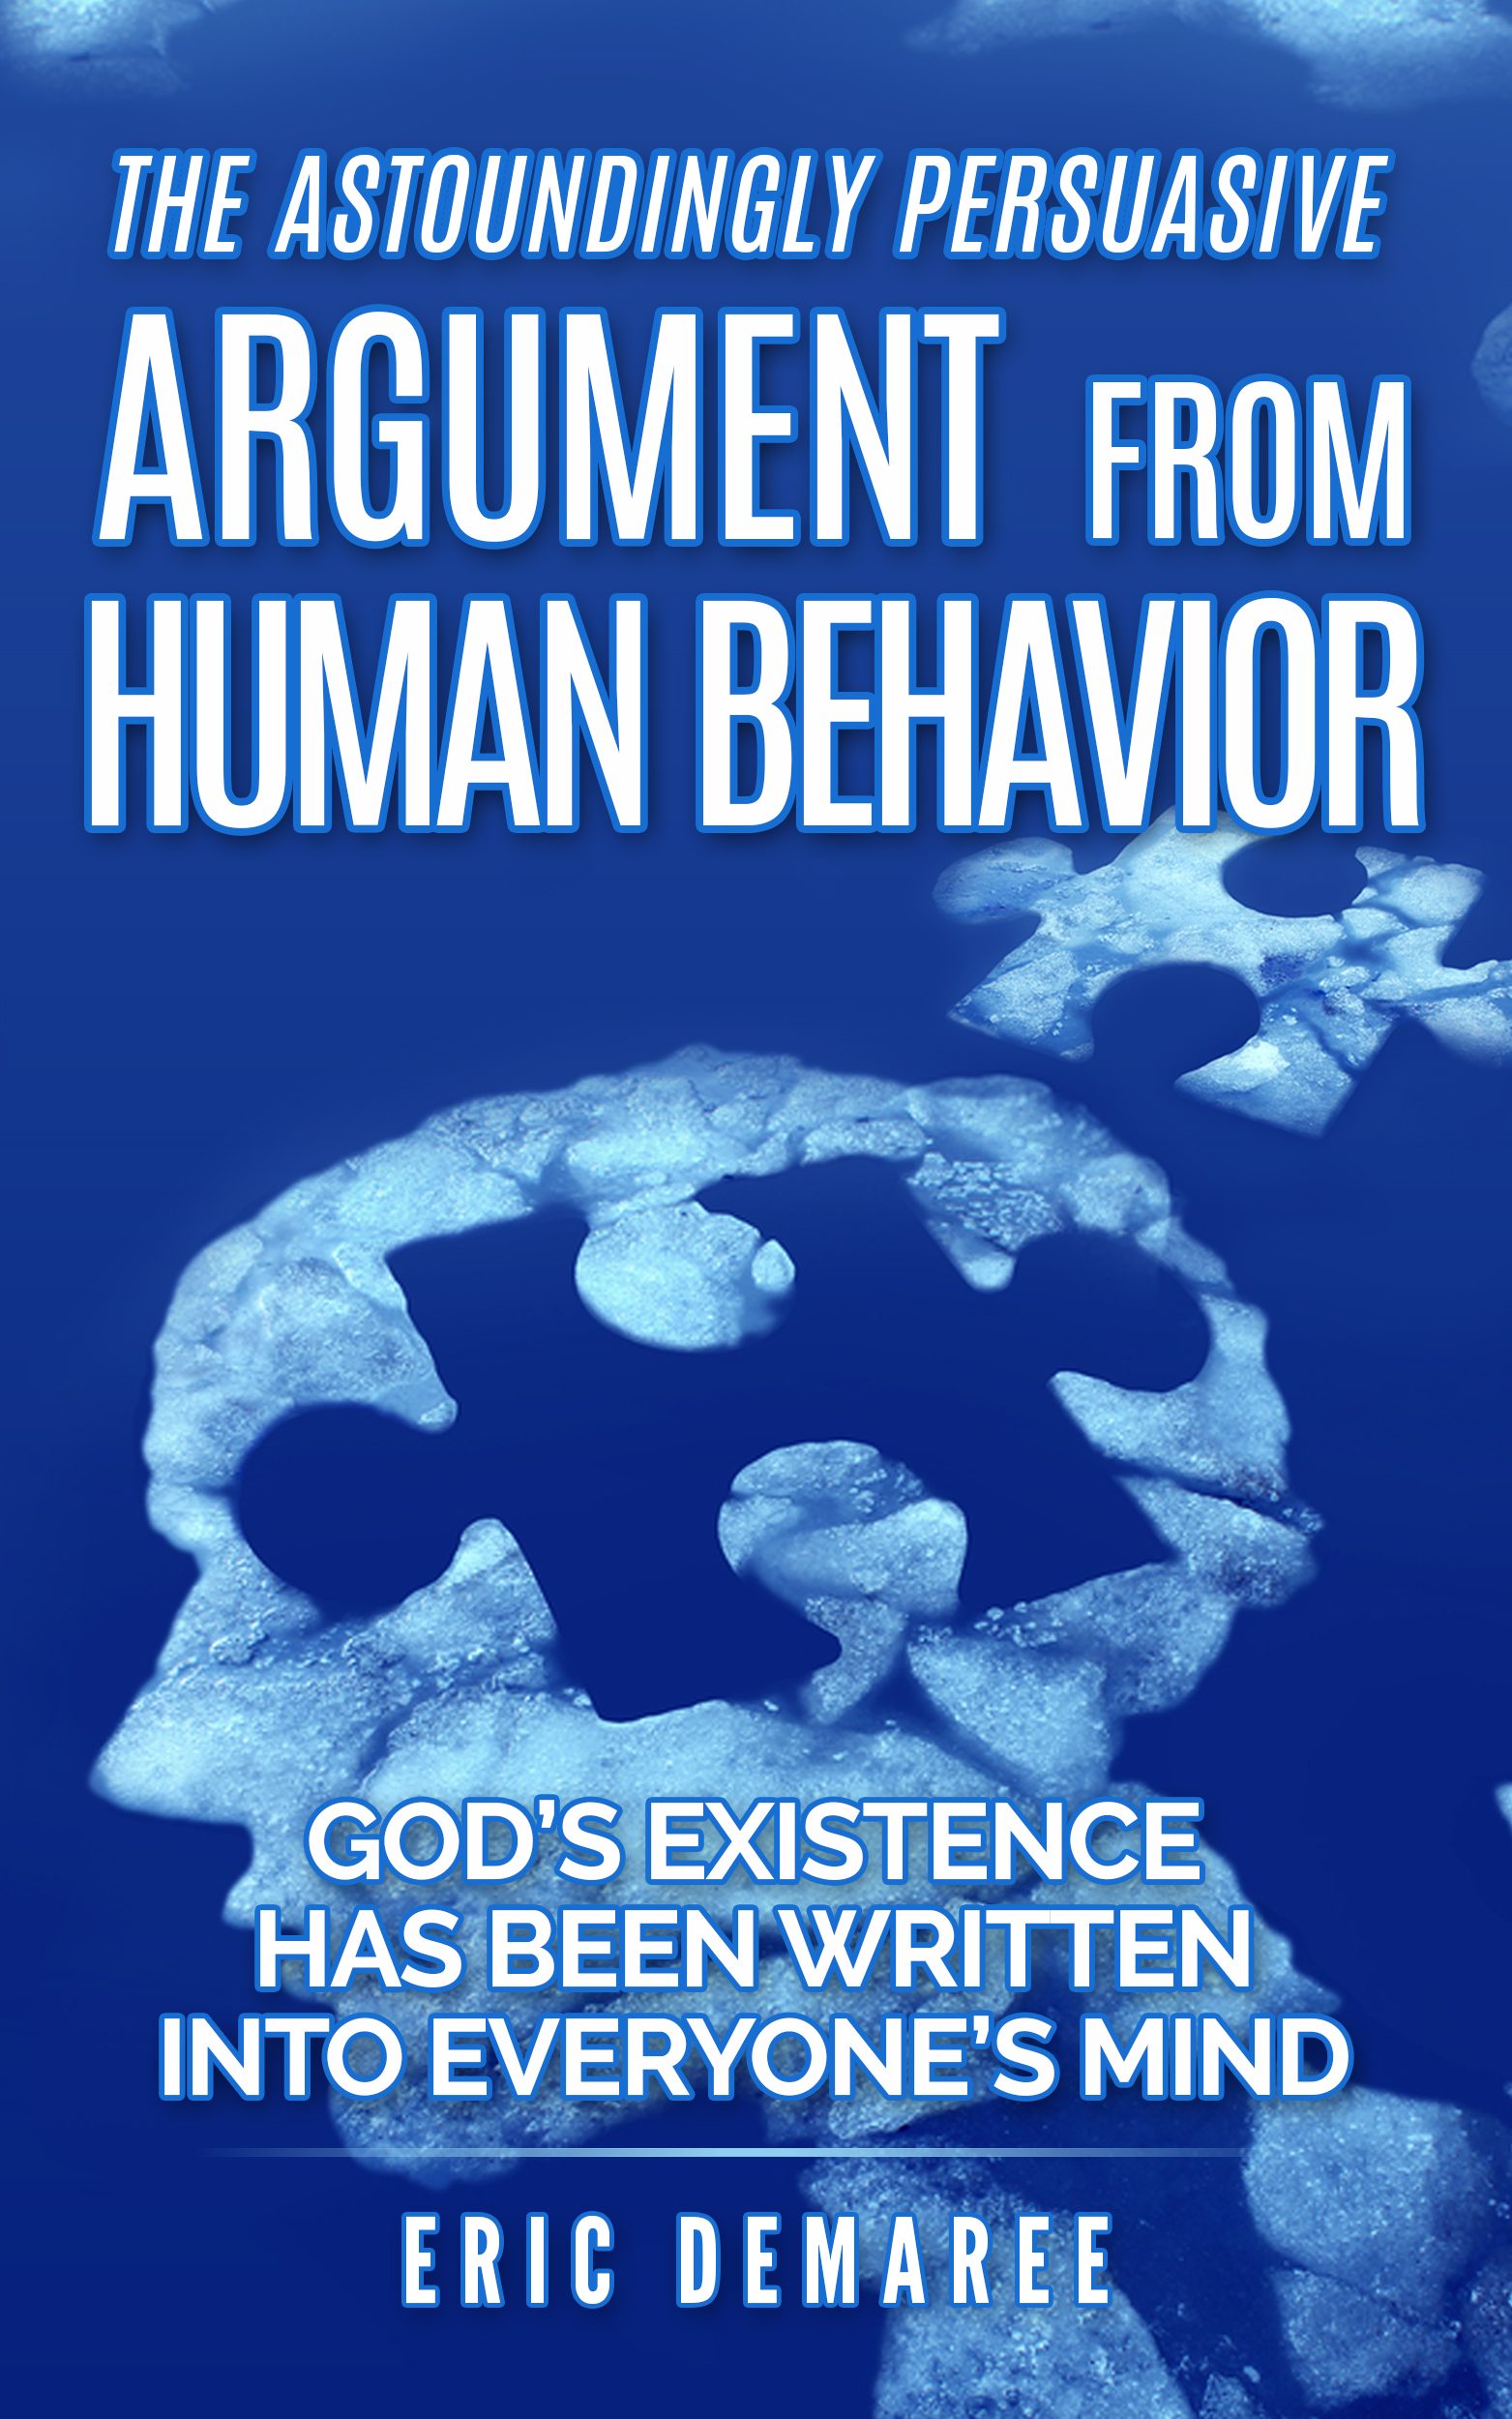 FREE: The Astoundingly Persuasive Argument from Human Behavior by Eric Demaree